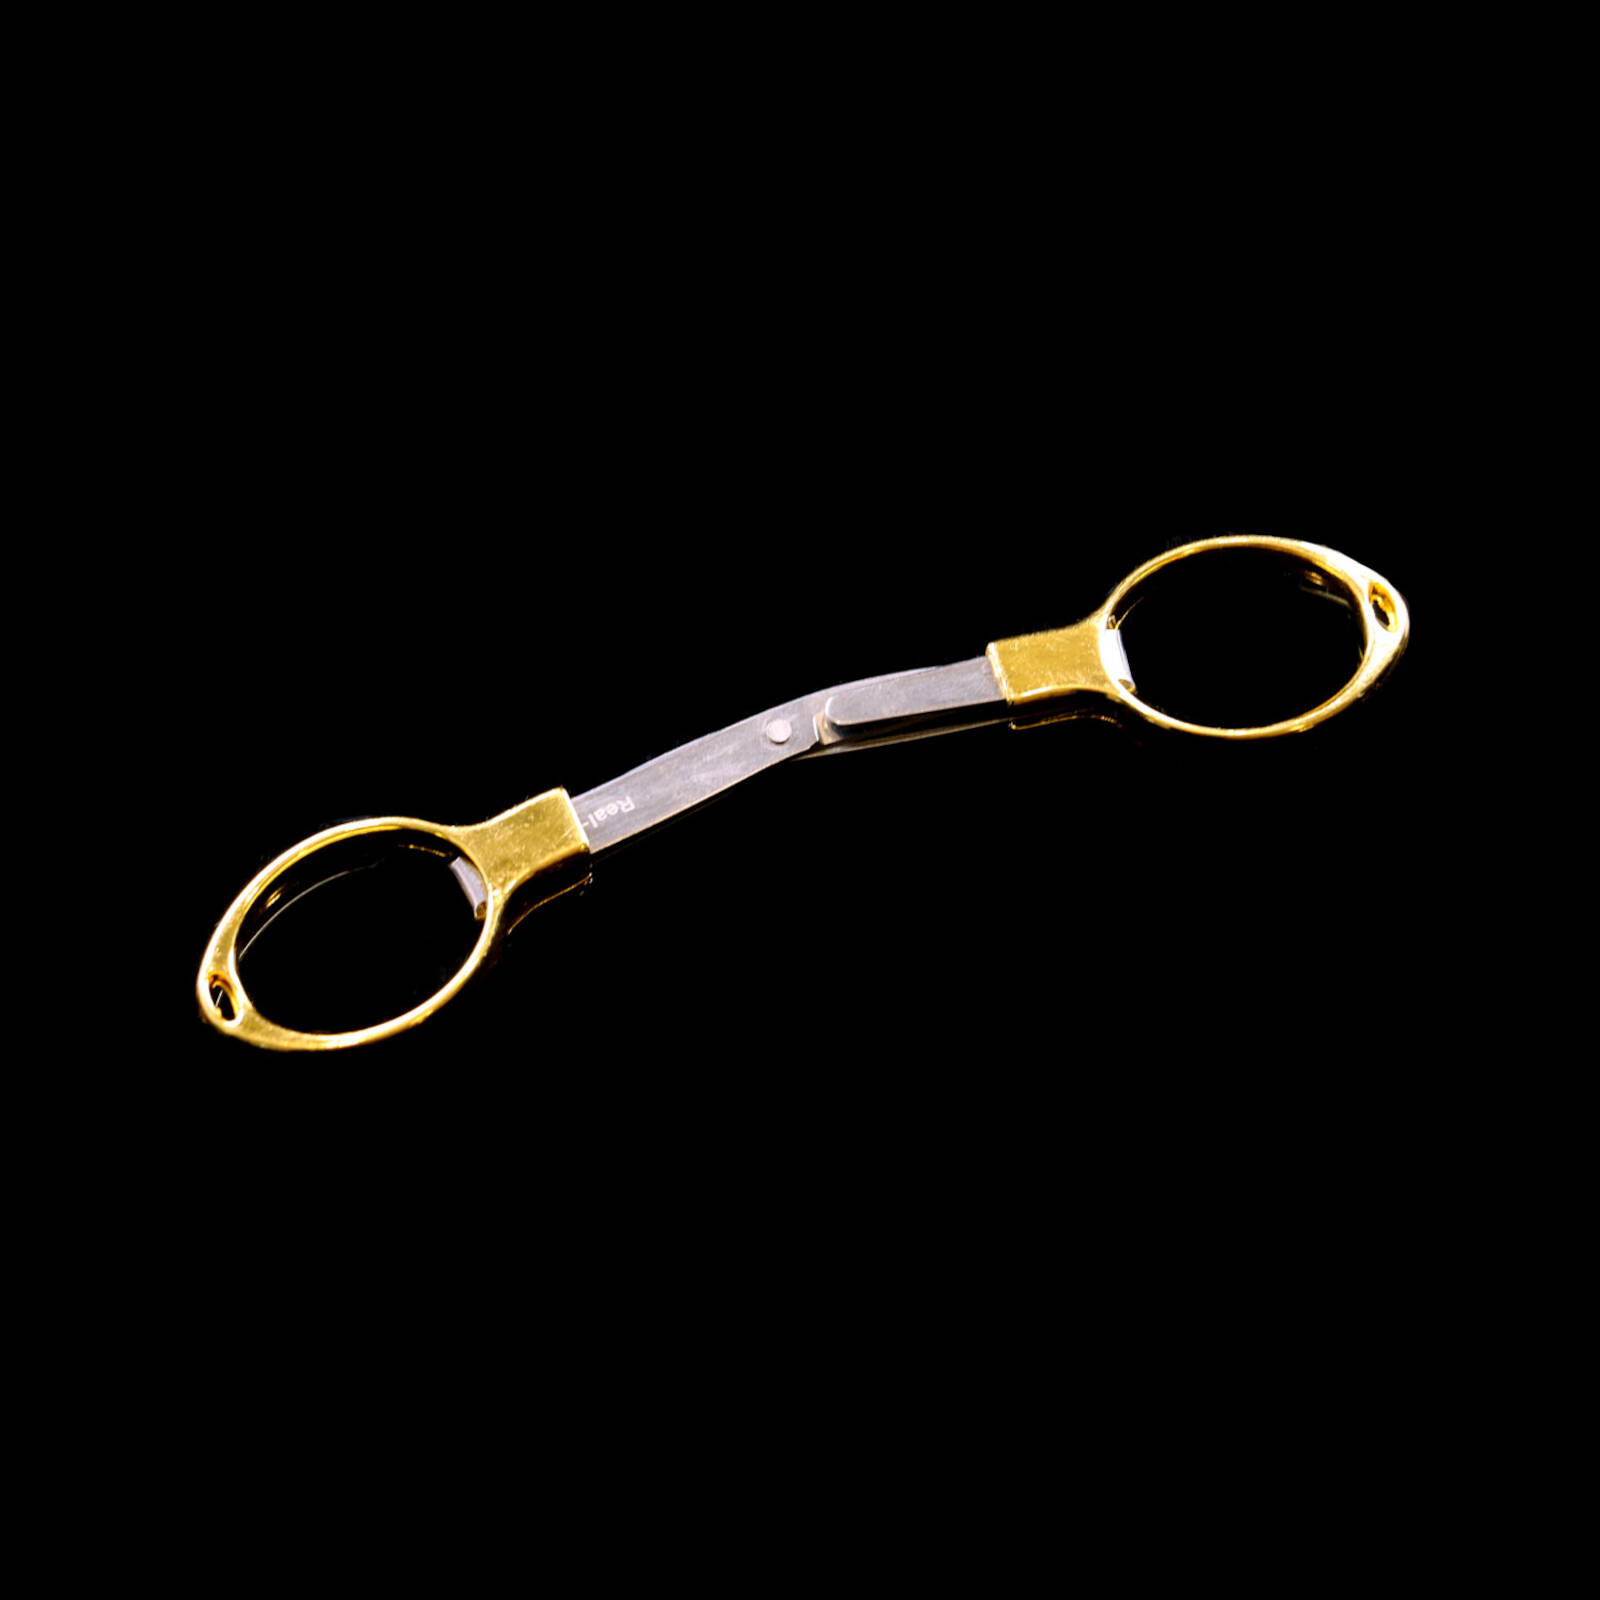 Pocket Sized Retractable Trimming Shears